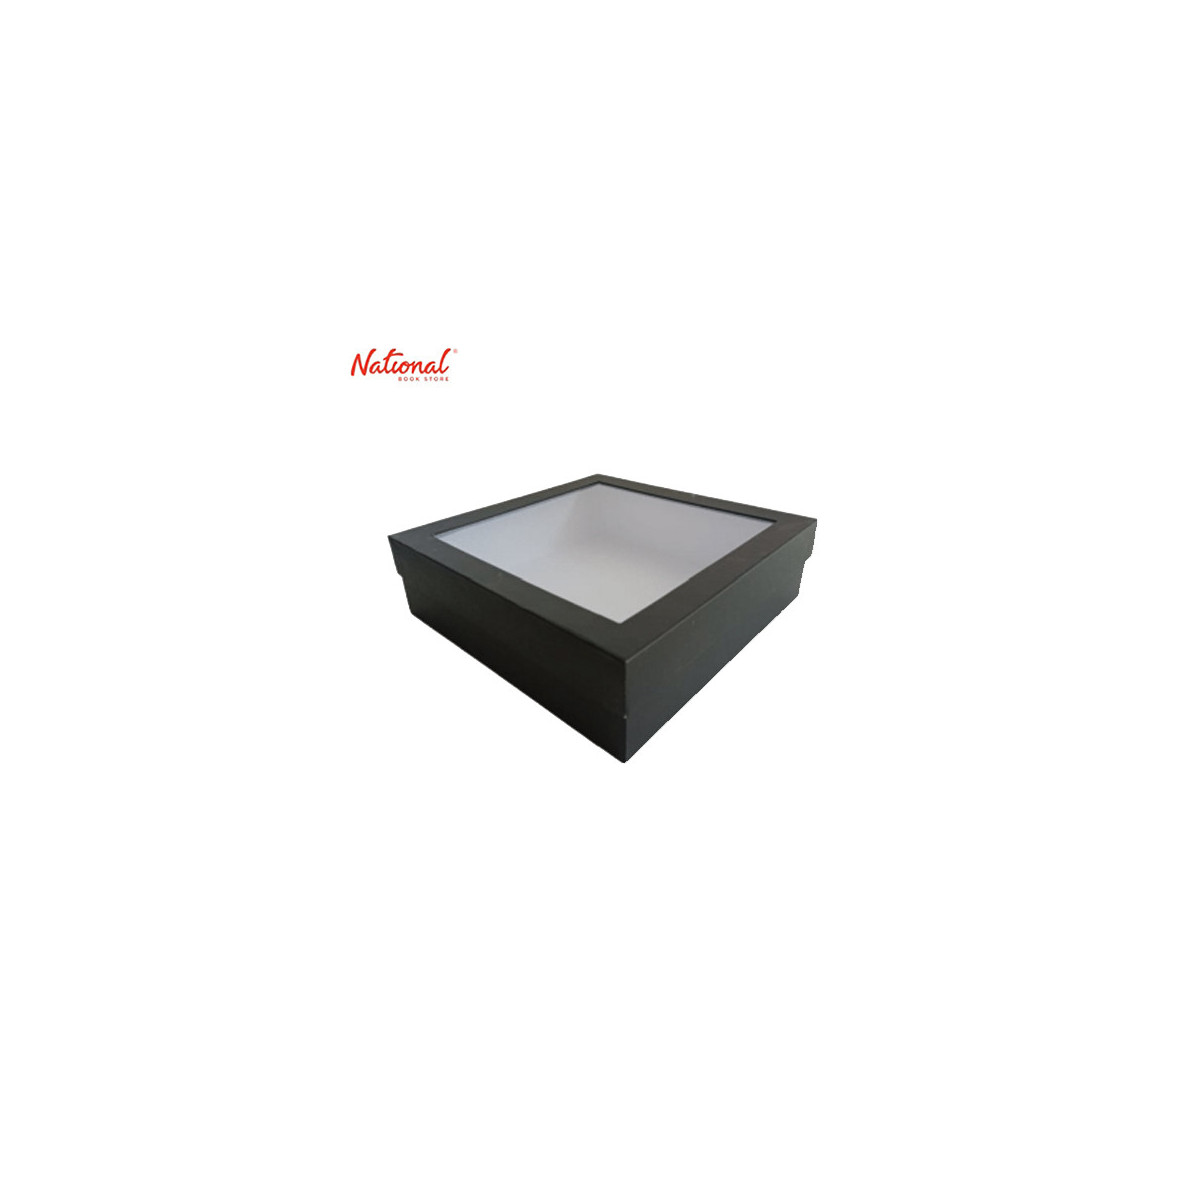 Plain Colored Gift Box Gr-Large 12.5 x 12.5 x 3.5 Inches, Black Grazing